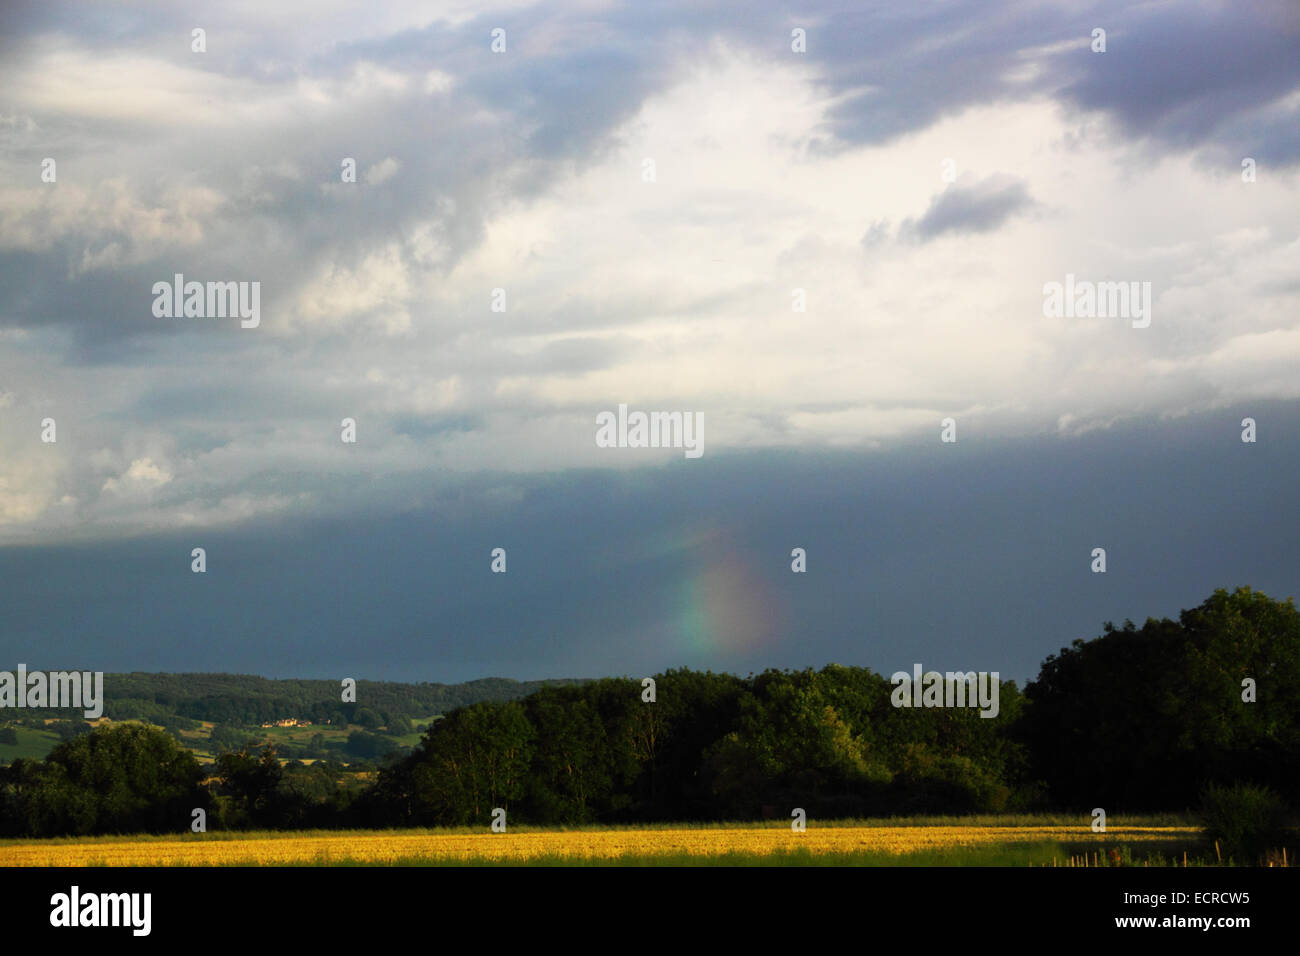 A part of a rainbow above fields on the horizon with dark clouds above. Stock Photo